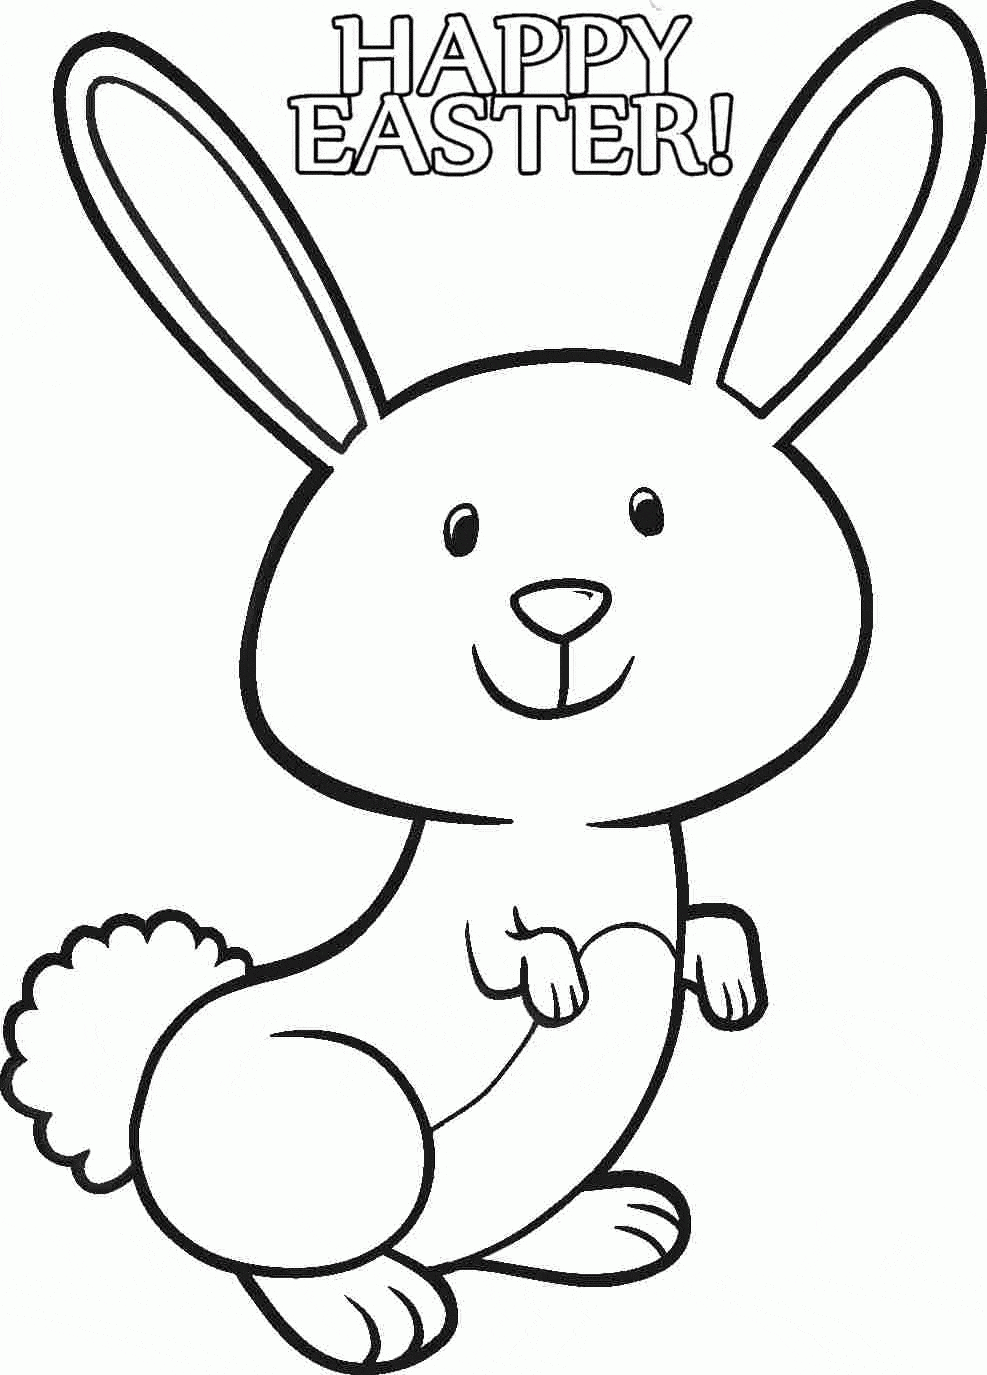 Bunny Image Coloring Page